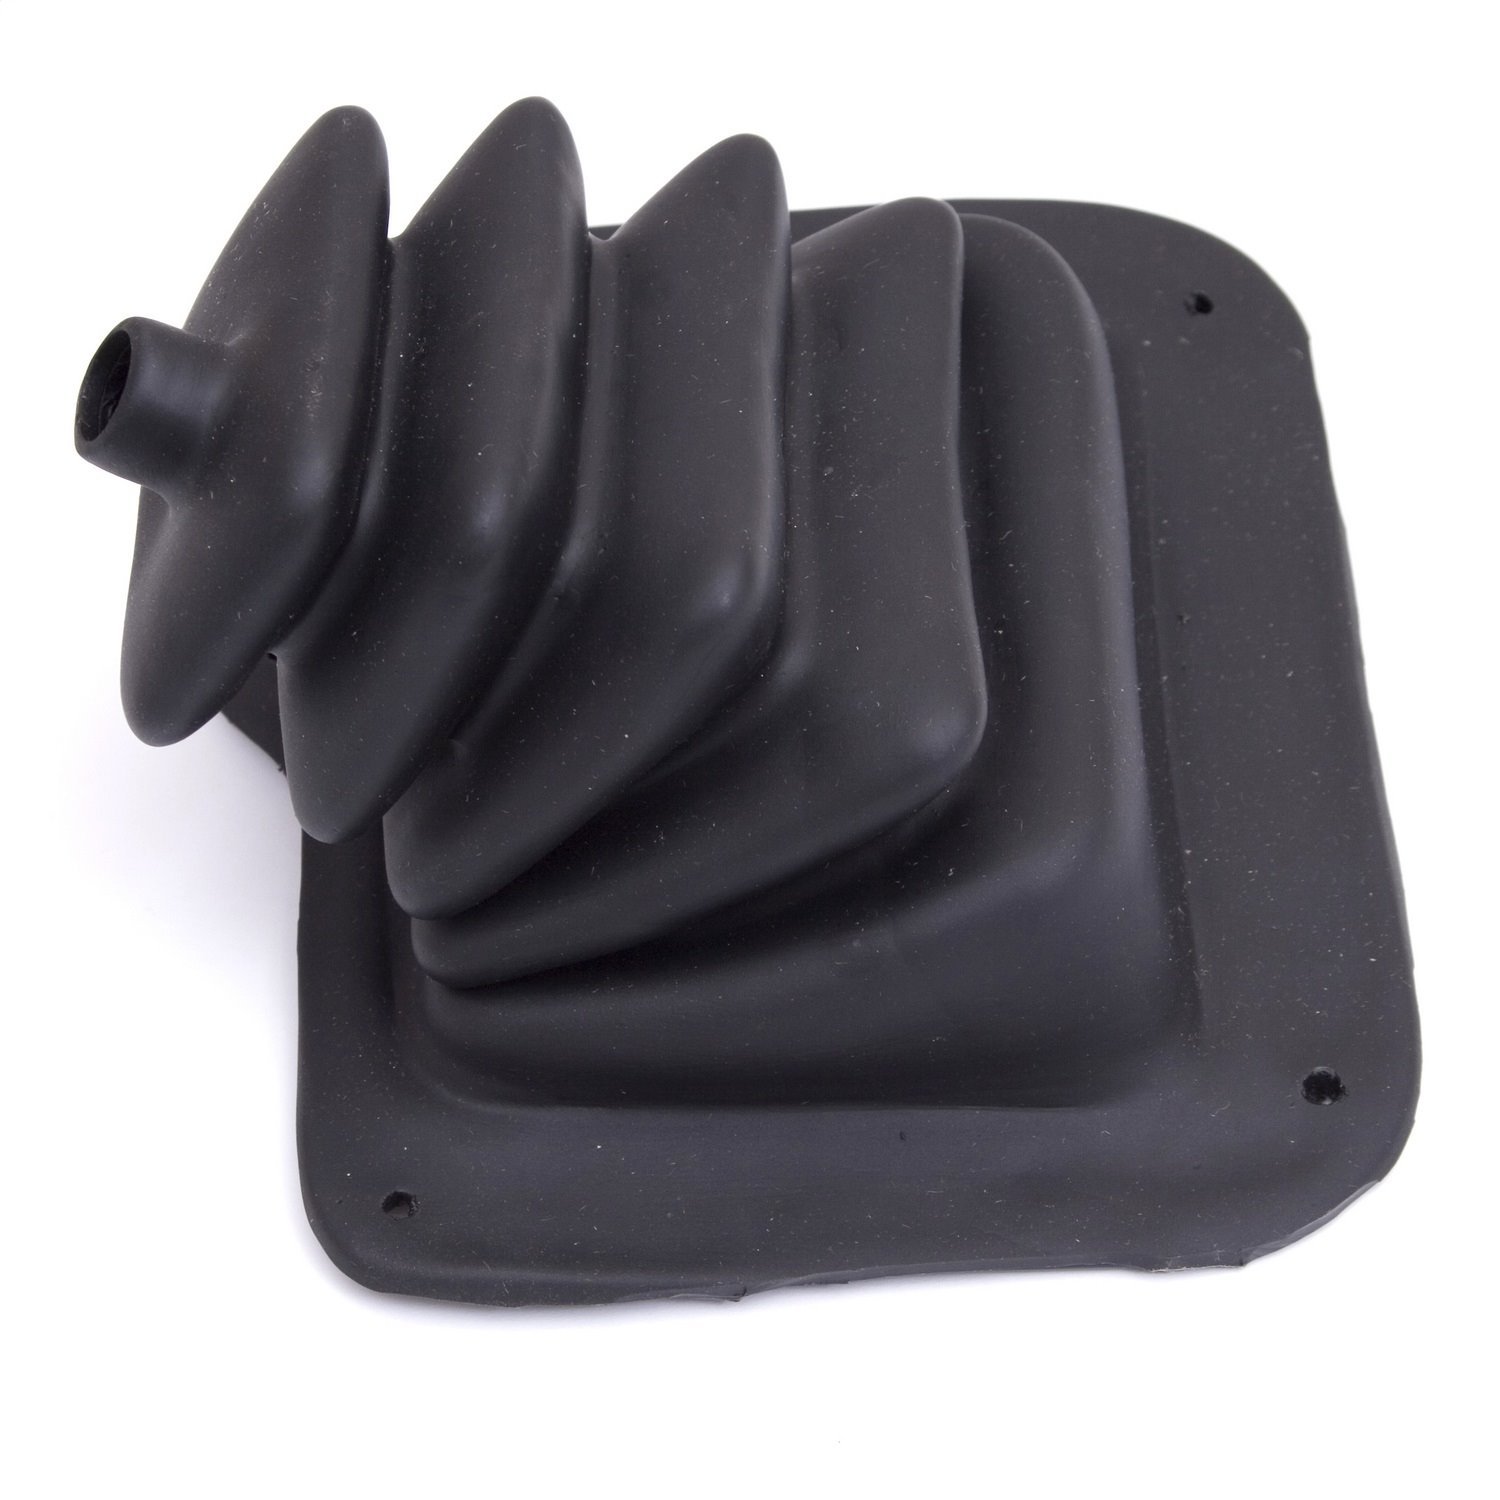 Replacement shifter boot from Omix-ADA, Fits Jeep CJ models with a T-4 T-5 or SR-4 transmission